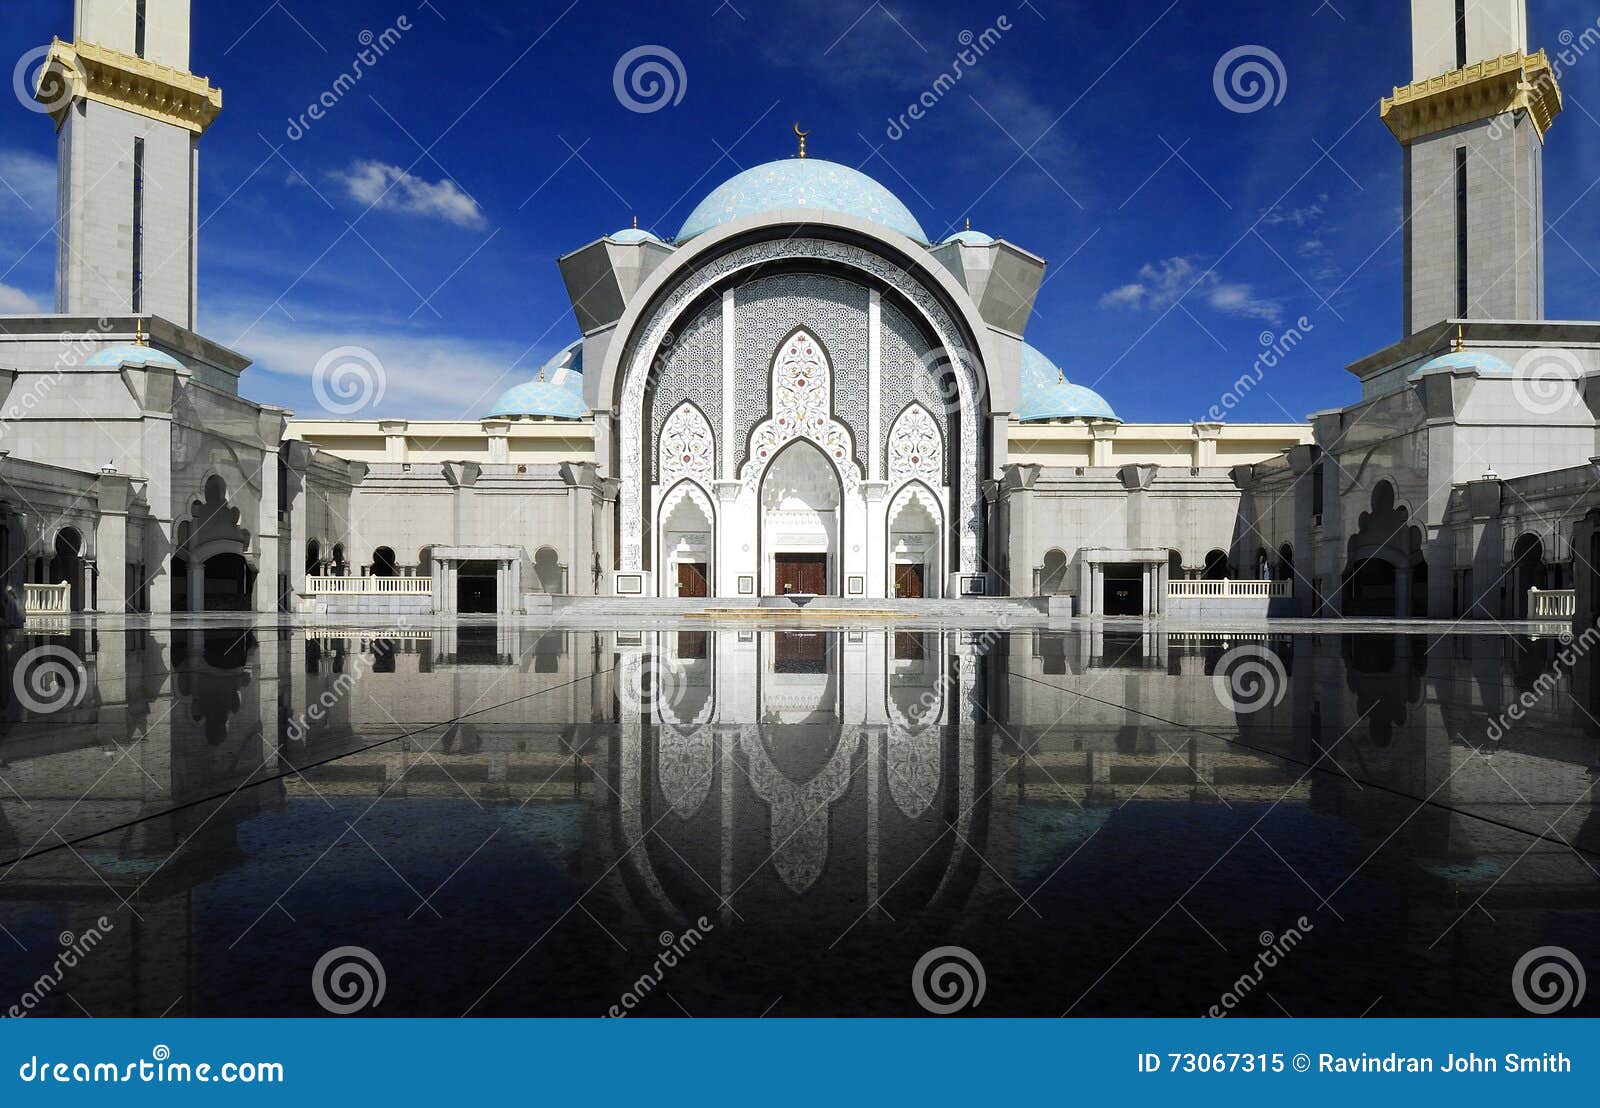 The Federal Territory Mosque Editorial Image Image Of Kuala Arch 73067315